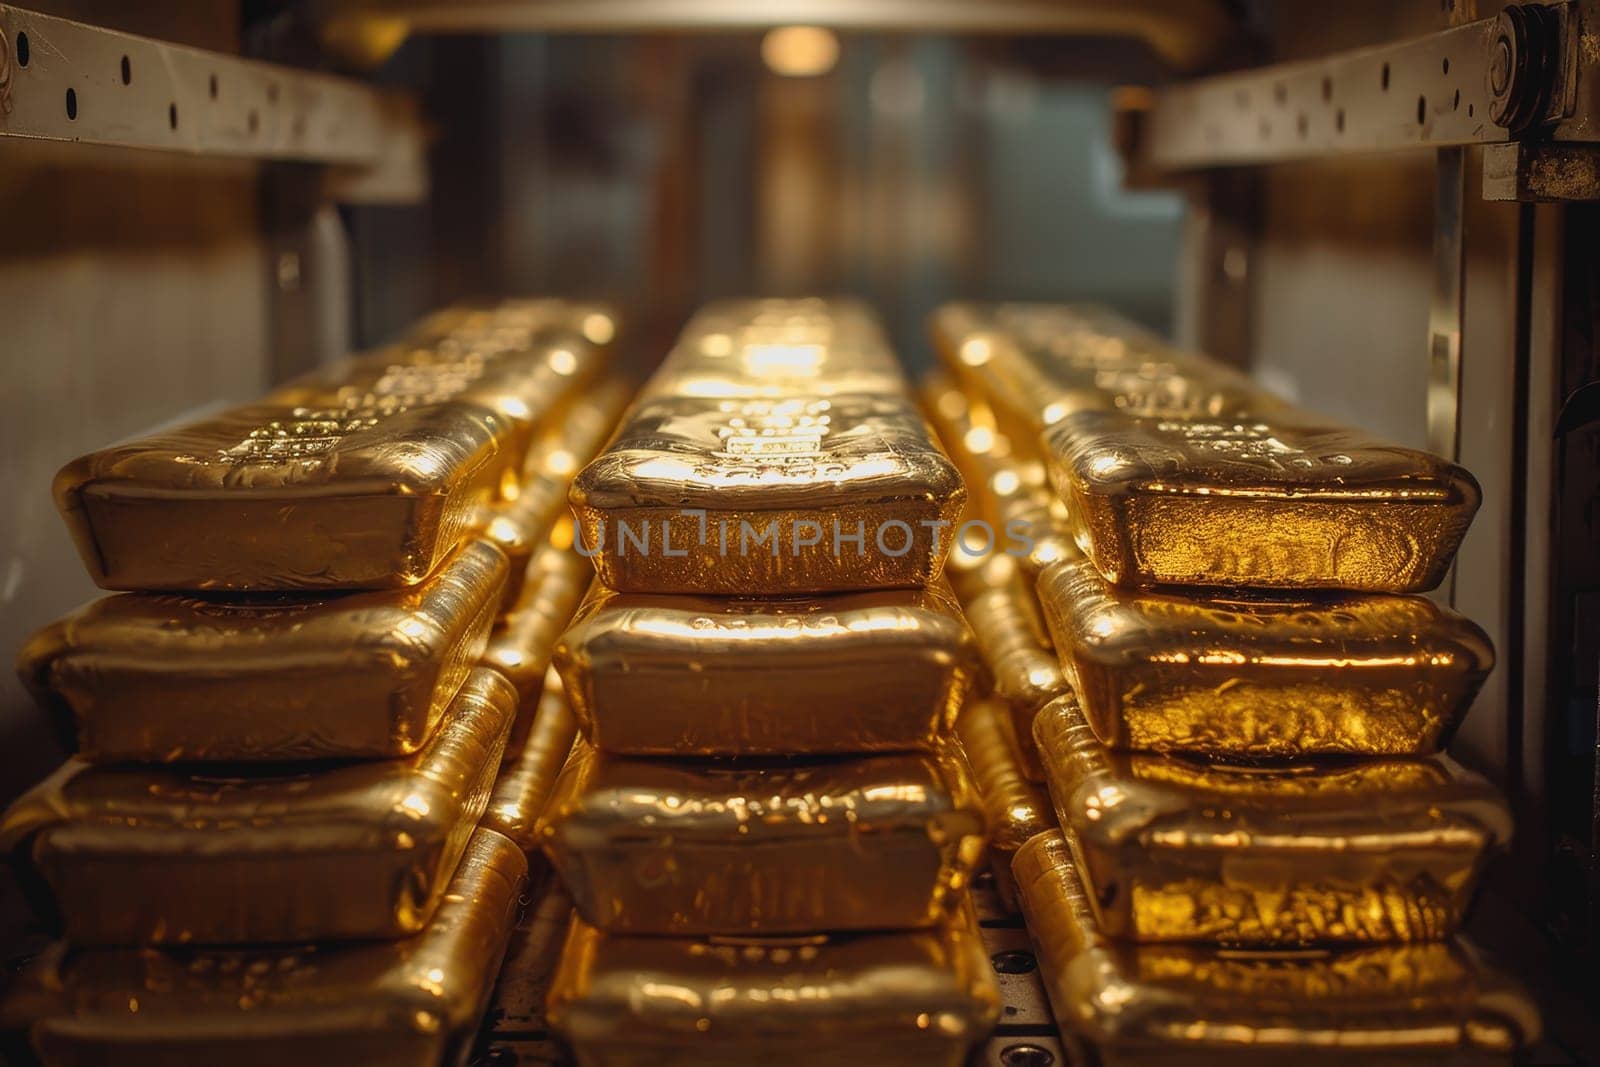 A stack of gold bars rests in the security room. by Manastrong